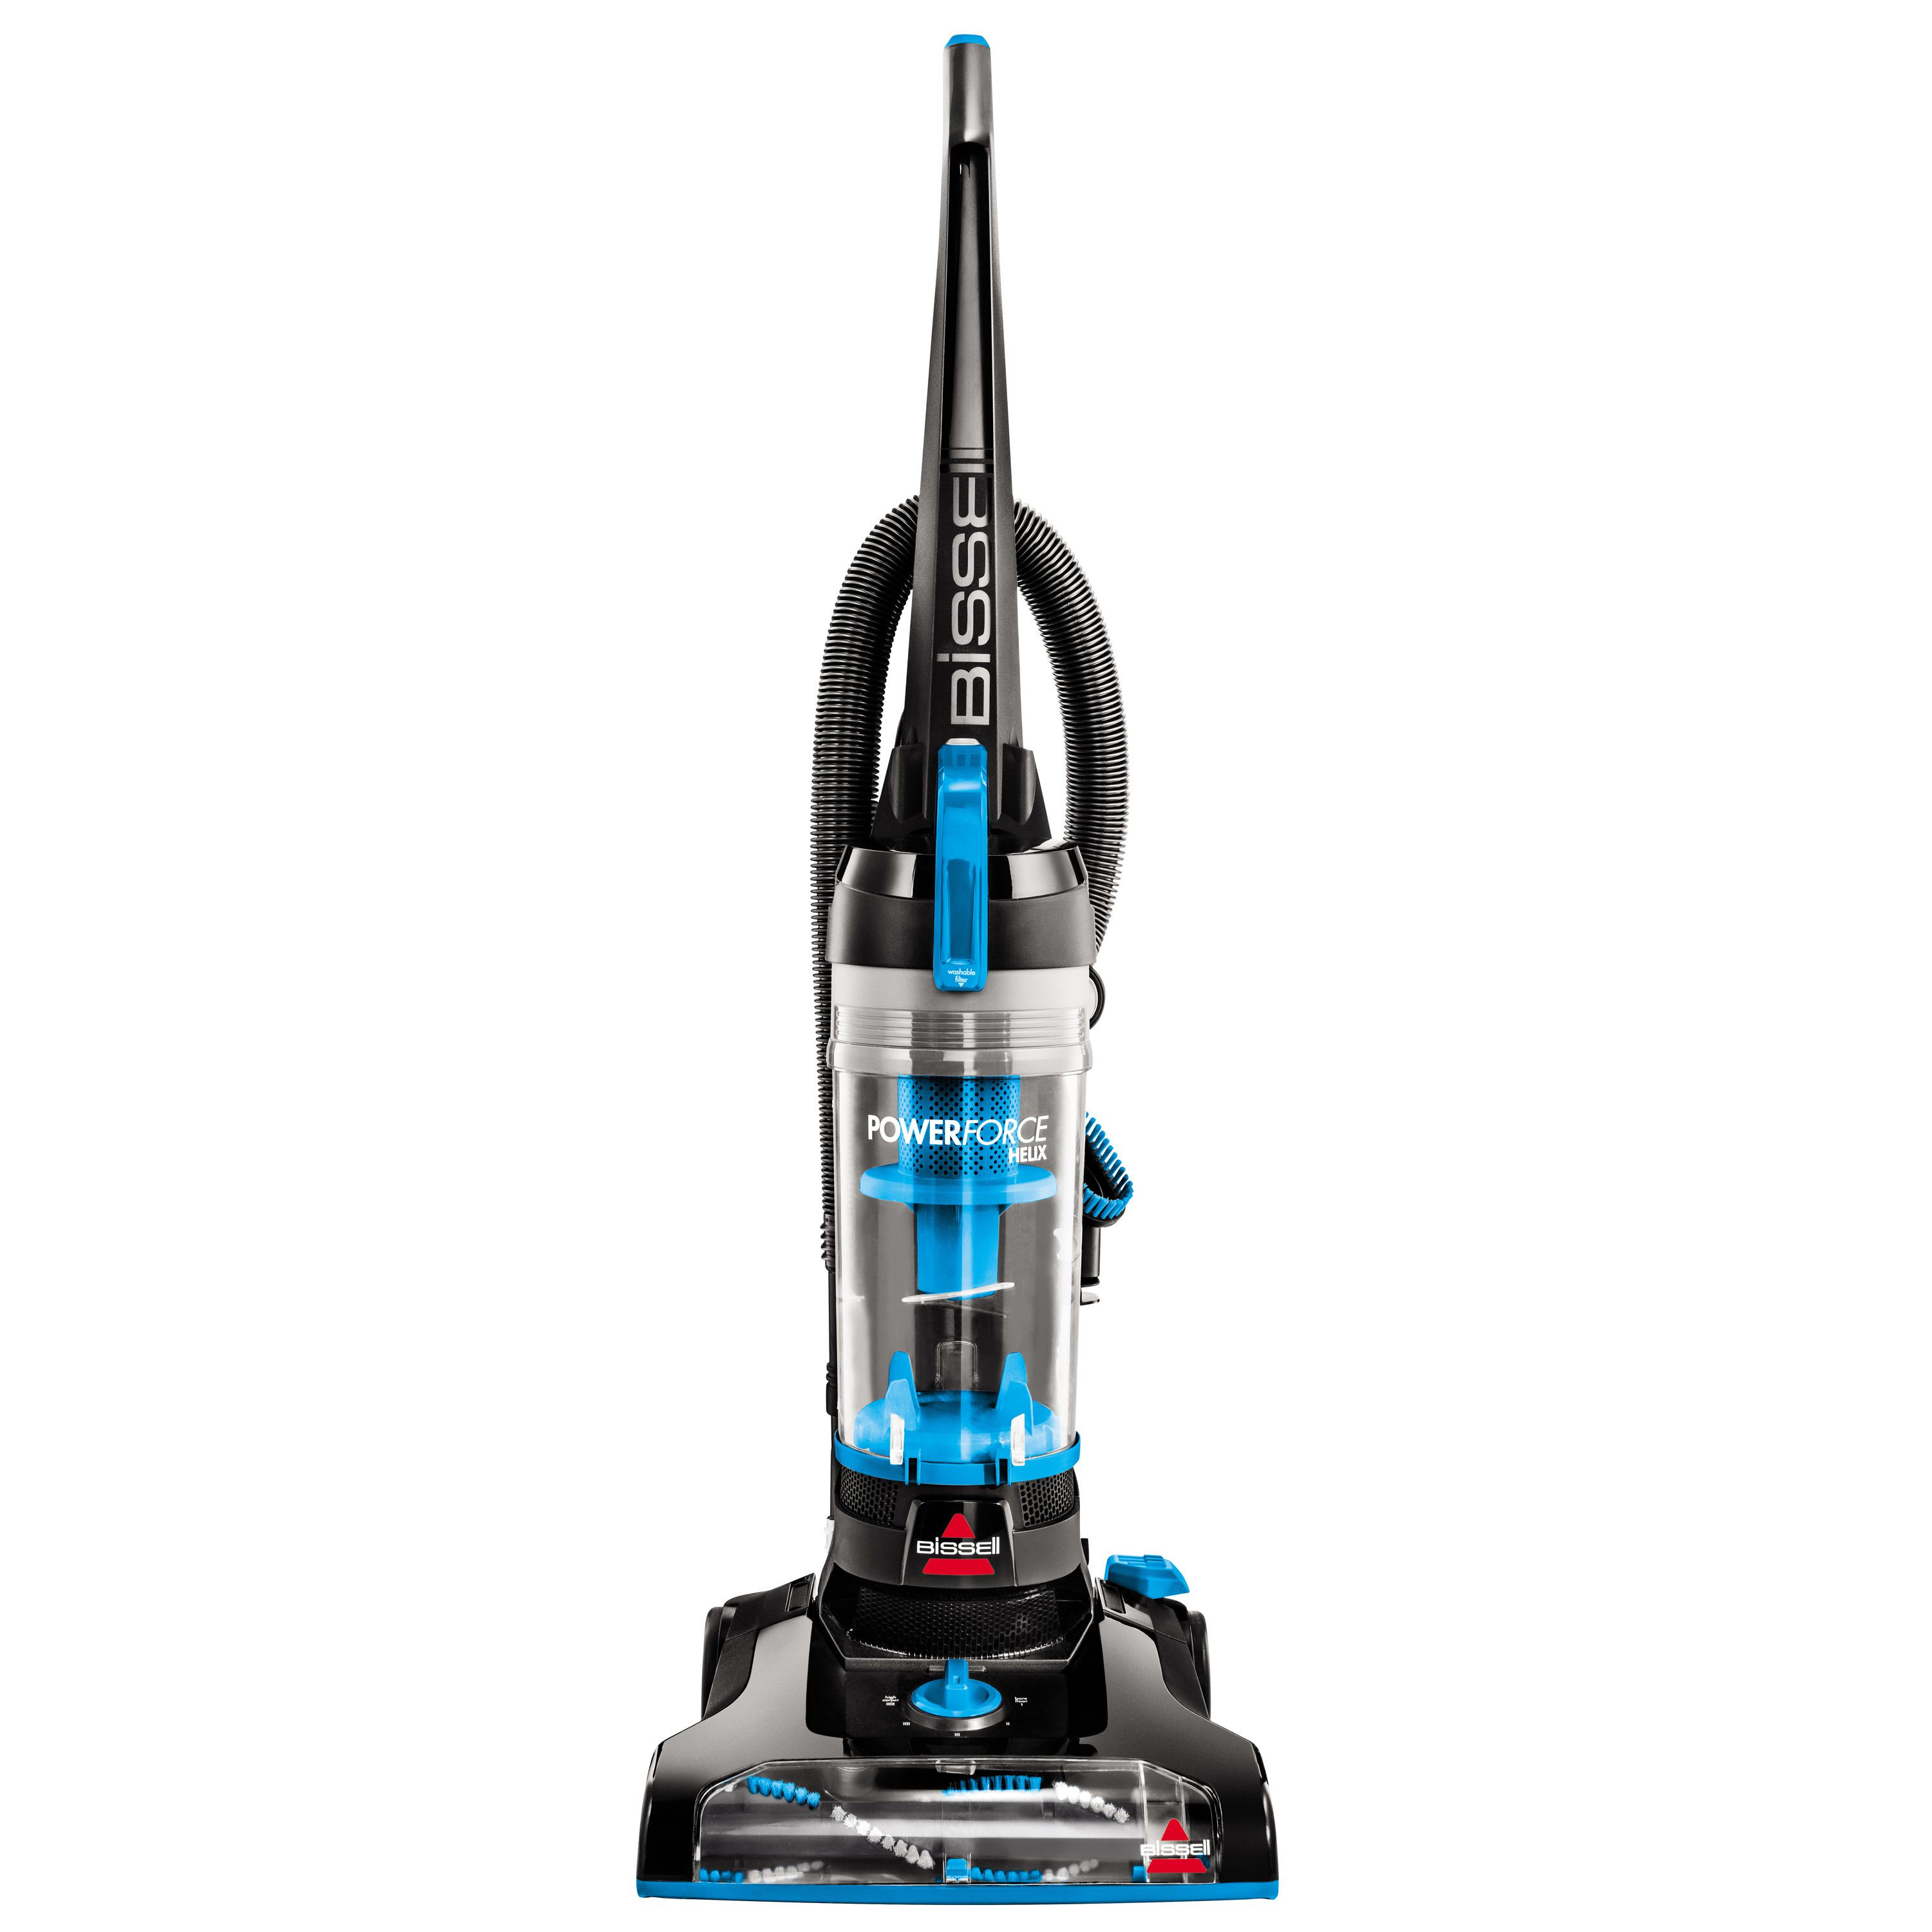 25 Lovable Hardwood Flooring Vacuums Recommendations 2024 free download hardwood flooring vacuums recommendations of the 10 best vacuum cleaners to buy in 2018 within e4b12fd4 906f 4bf0 a270 afe8dc531860 1 c698176588ad49a4cf1bde639e9a838a 5bace08ac9e77c00257d945